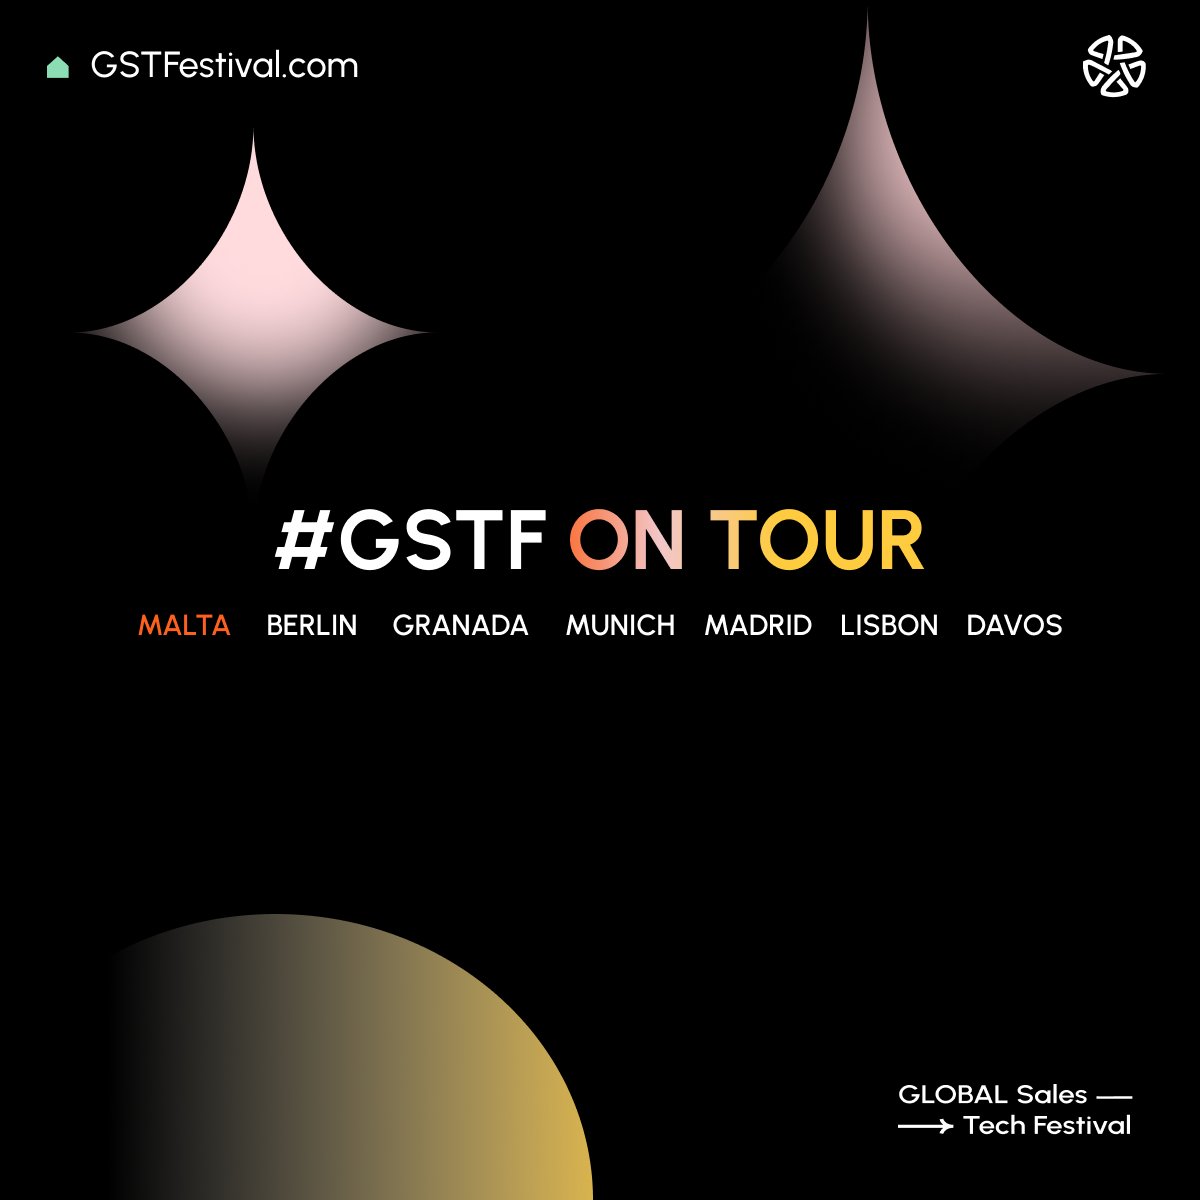 Join us at ClubGlobals' networking experience in Malta on May 9-10 at the EU-Startups Summit! Engage with leaders, enjoy tours, pitch your ideas at open mic sessions, and party at night. 🌍✨🎤🪩 #GSTFOnTour #Malta #Networking